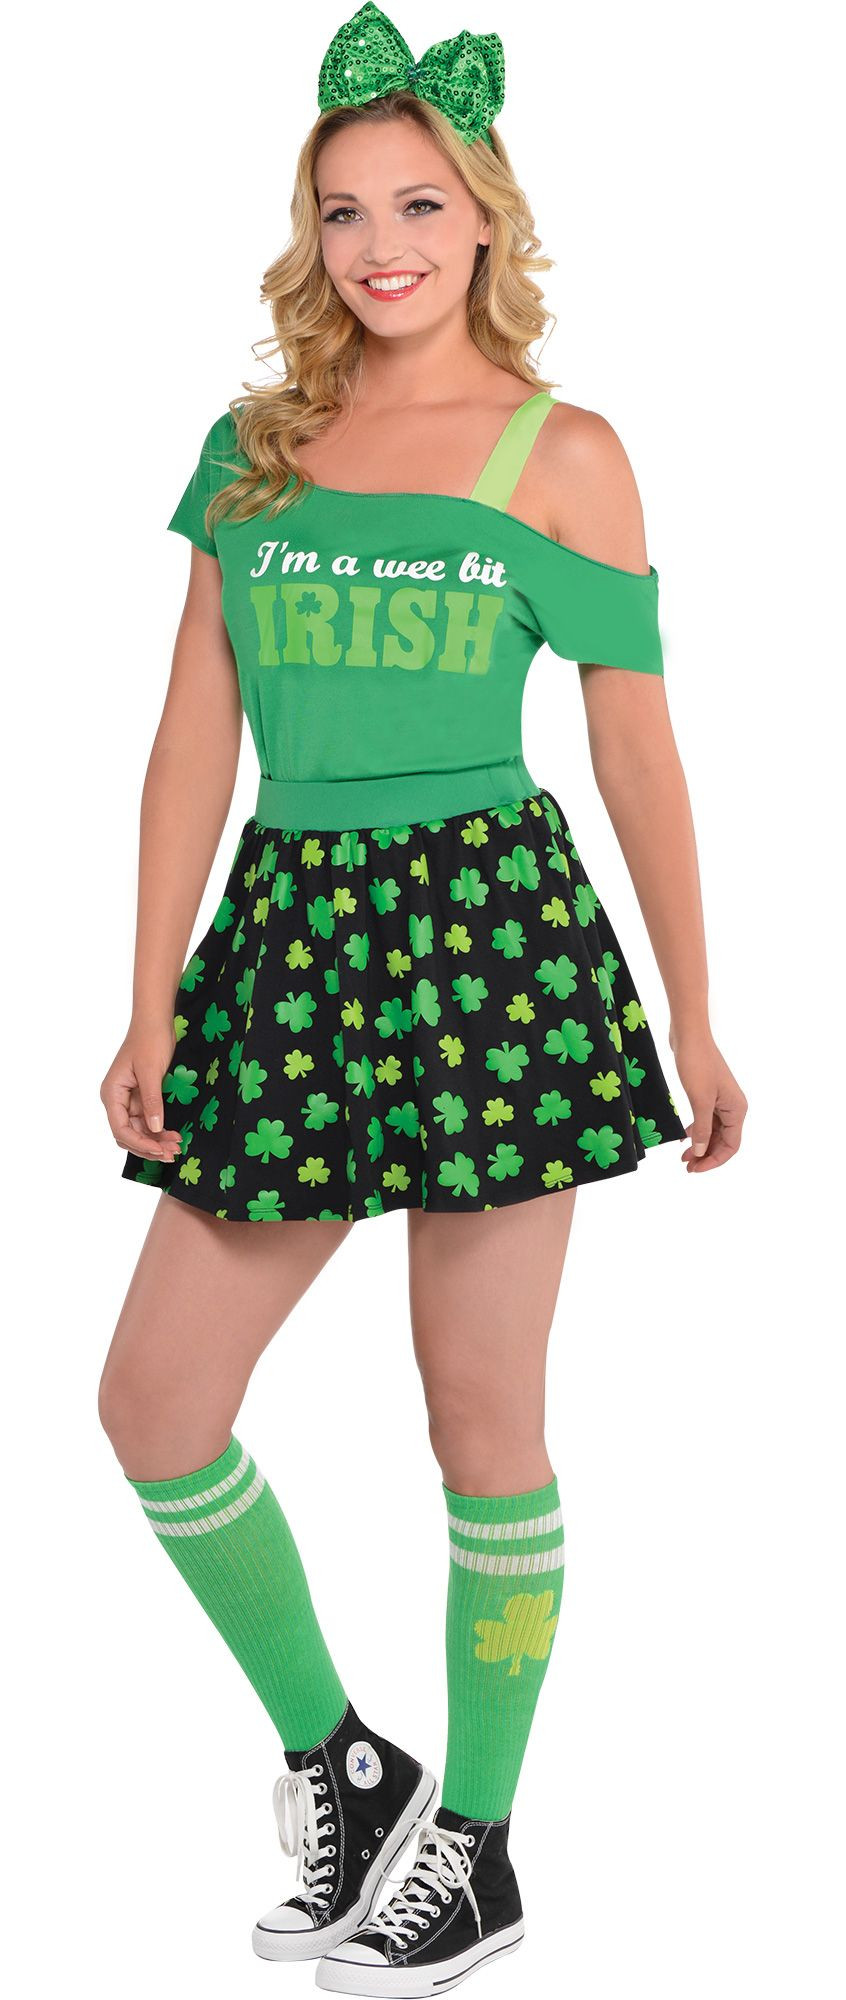 Party City St Patrick's Day Costumes
 Women s Cute & Sweet St Patrick s Day Wearables Party City